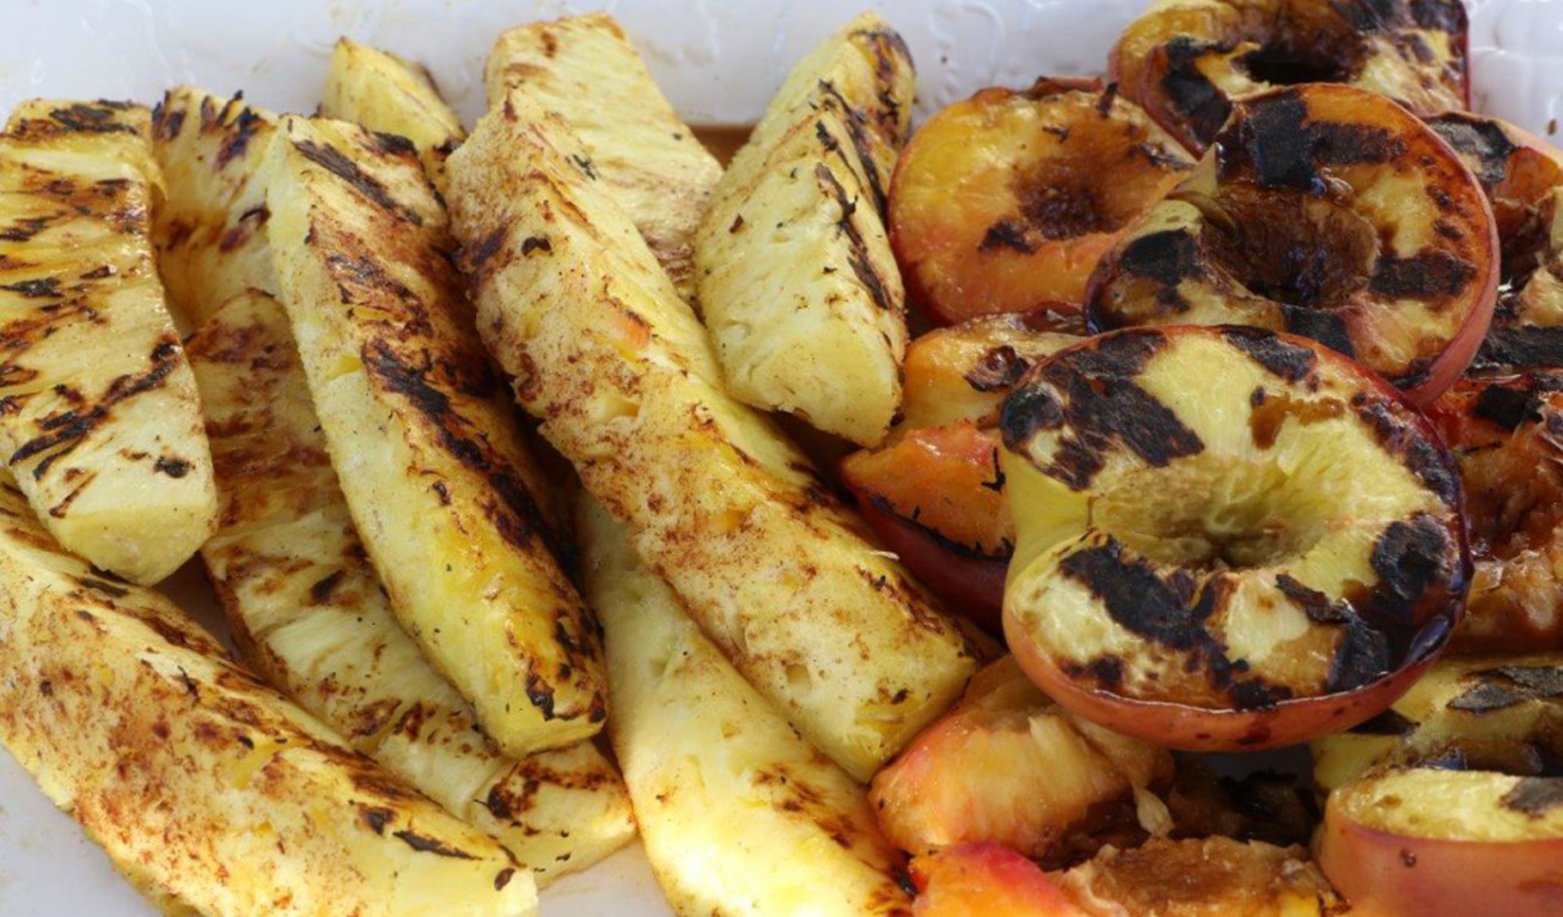 grilled pineapple and peaches 1563x917